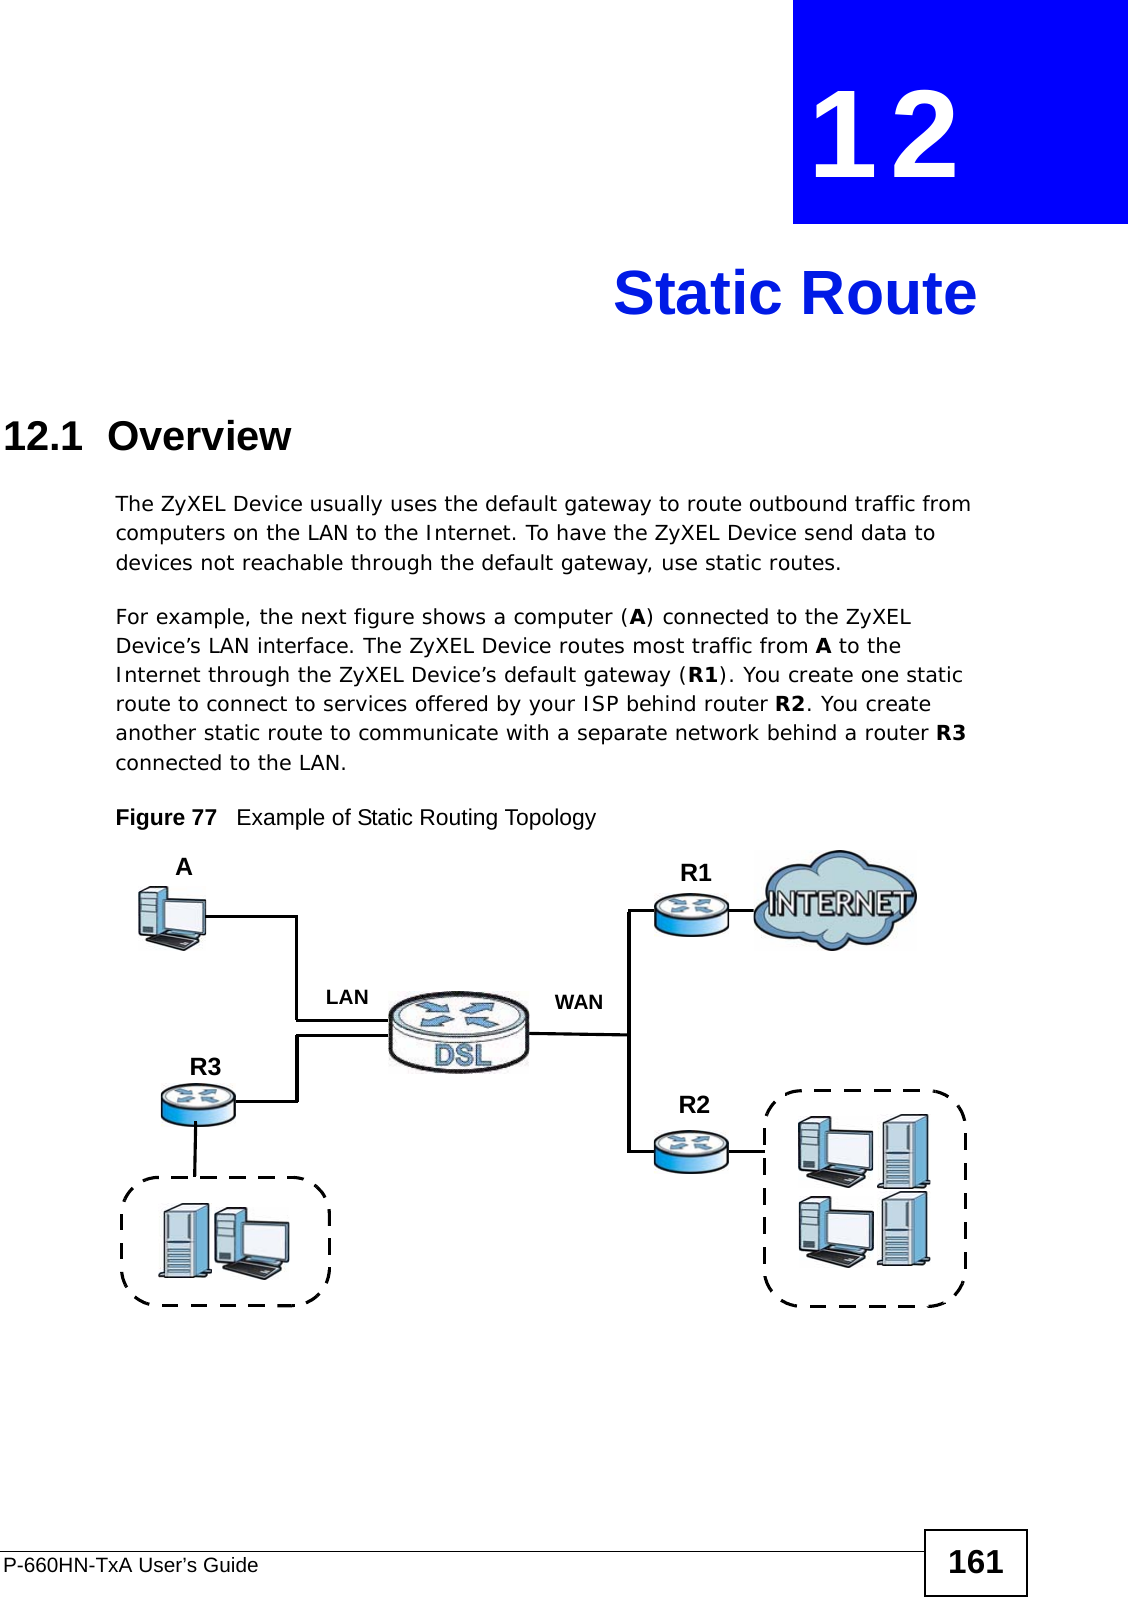 P-660HN-TxA User’s Guide 161CHAPTER  12 Static Route12.1  Overview The ZyXEL Device usually uses the default gateway to route outbound traffic from computers on the LAN to the Internet. To have the ZyXEL Device send data to devices not reachable through the default gateway, use static routes.For example, the next figure shows a computer (A) connected to the ZyXEL Device’s LAN interface. The ZyXEL Device routes most traffic from A to the Internet through the ZyXEL Device’s default gateway (R1). You create one static route to connect to services offered by your ISP behind router R2. You create another static route to communicate with a separate network behind a router R3 connected to the LAN.   Figure 77   Example of Static Routing TopologyWANR1R2AR3LAN